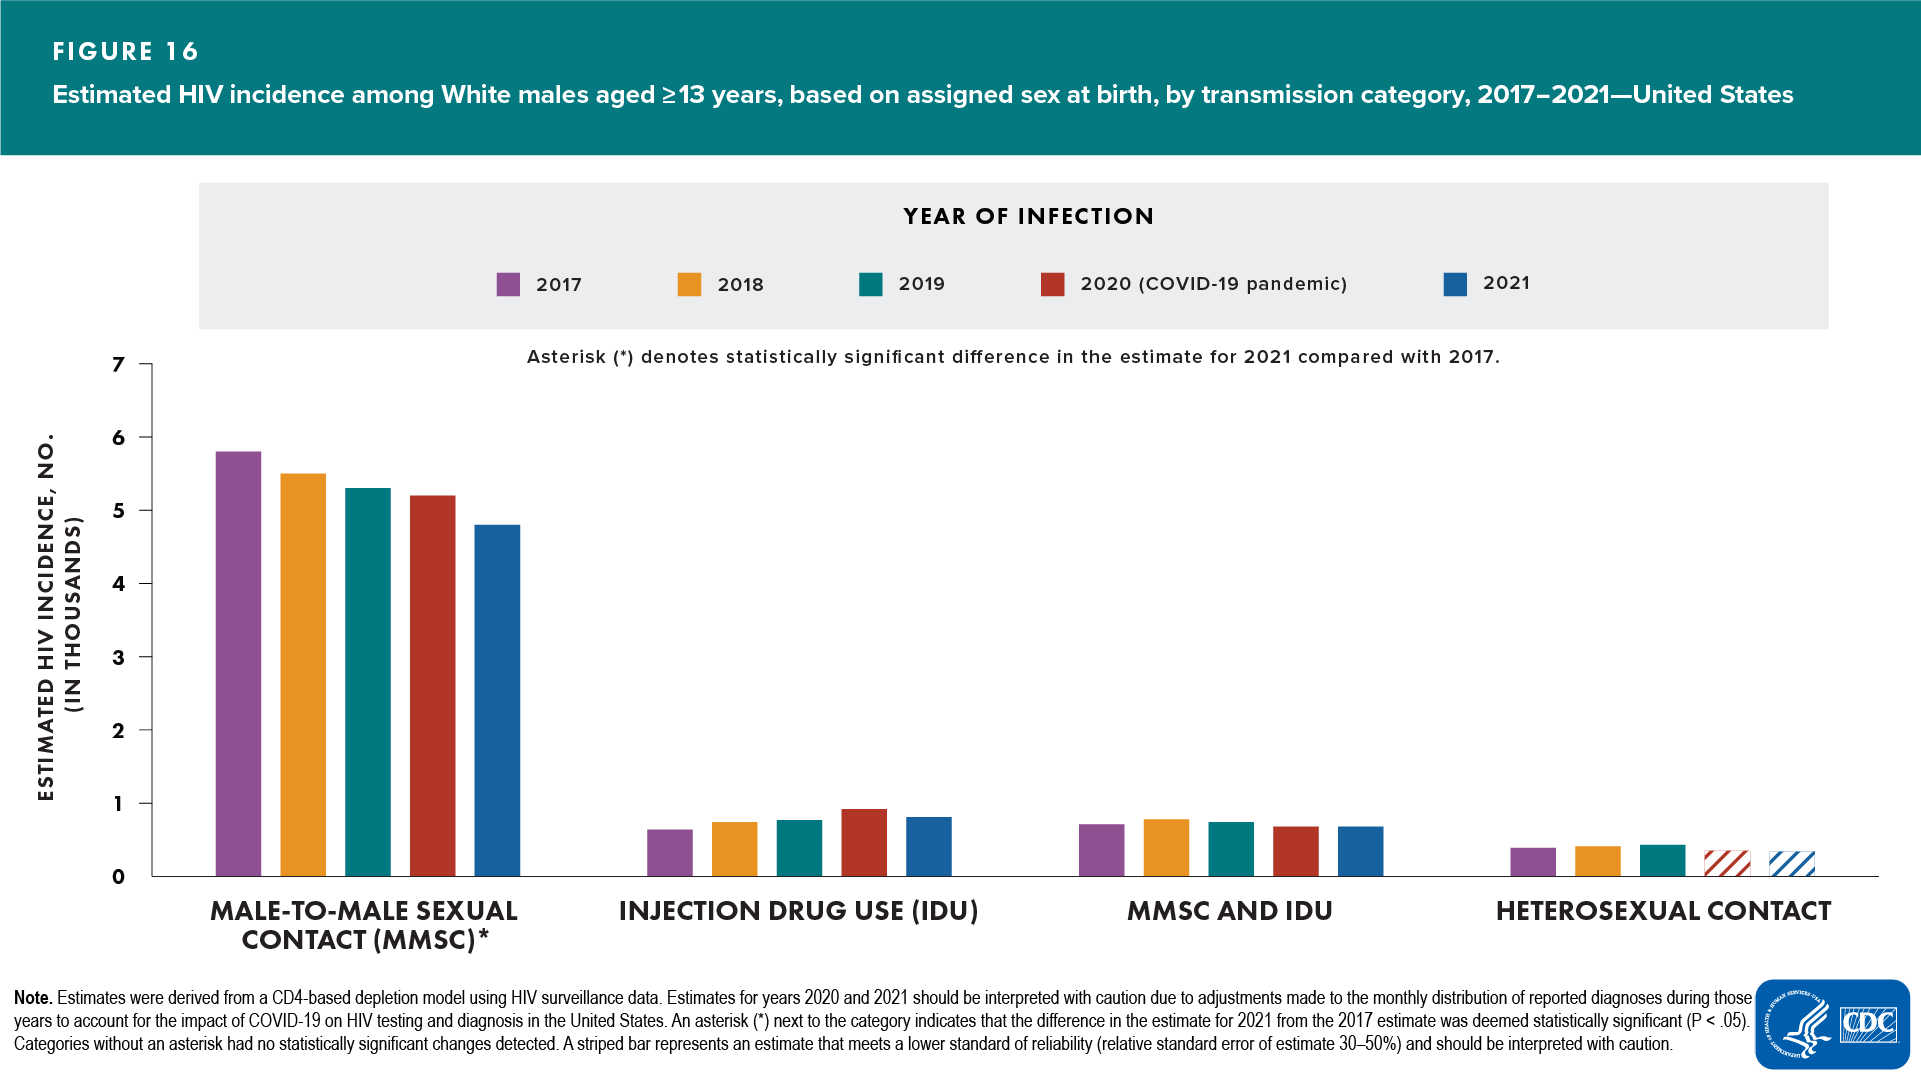 Figure 16. Estimated HIV incidence among White males aged ≥13 years, based on assigned sex at birth, by transmission category, 2017–2021—United States